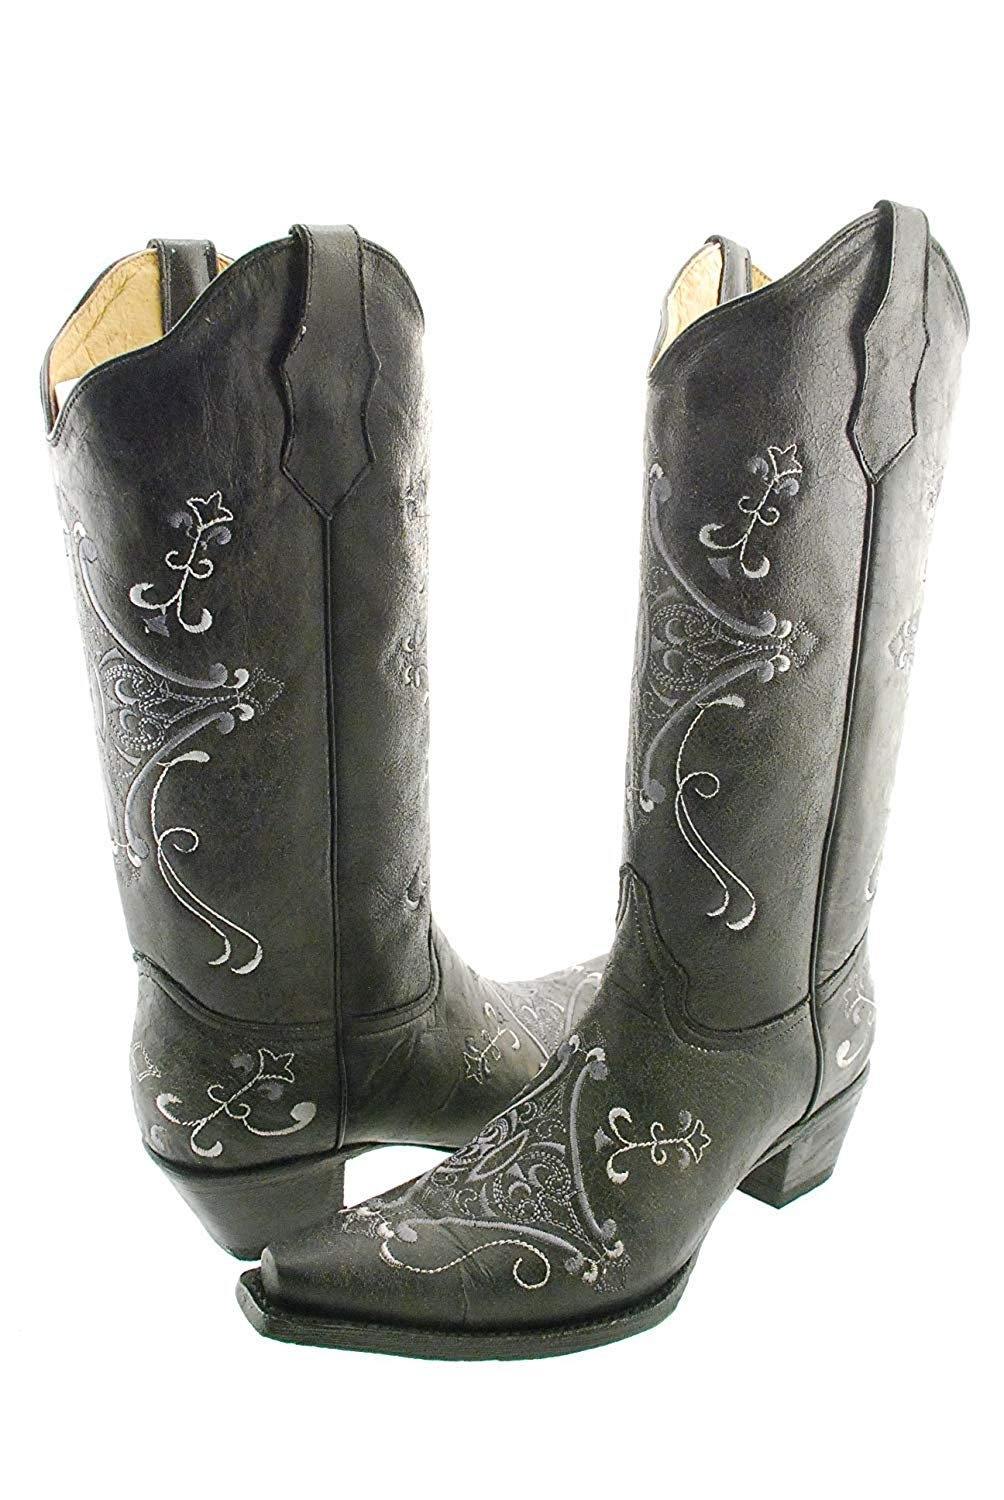 circle g women's crackle western boots